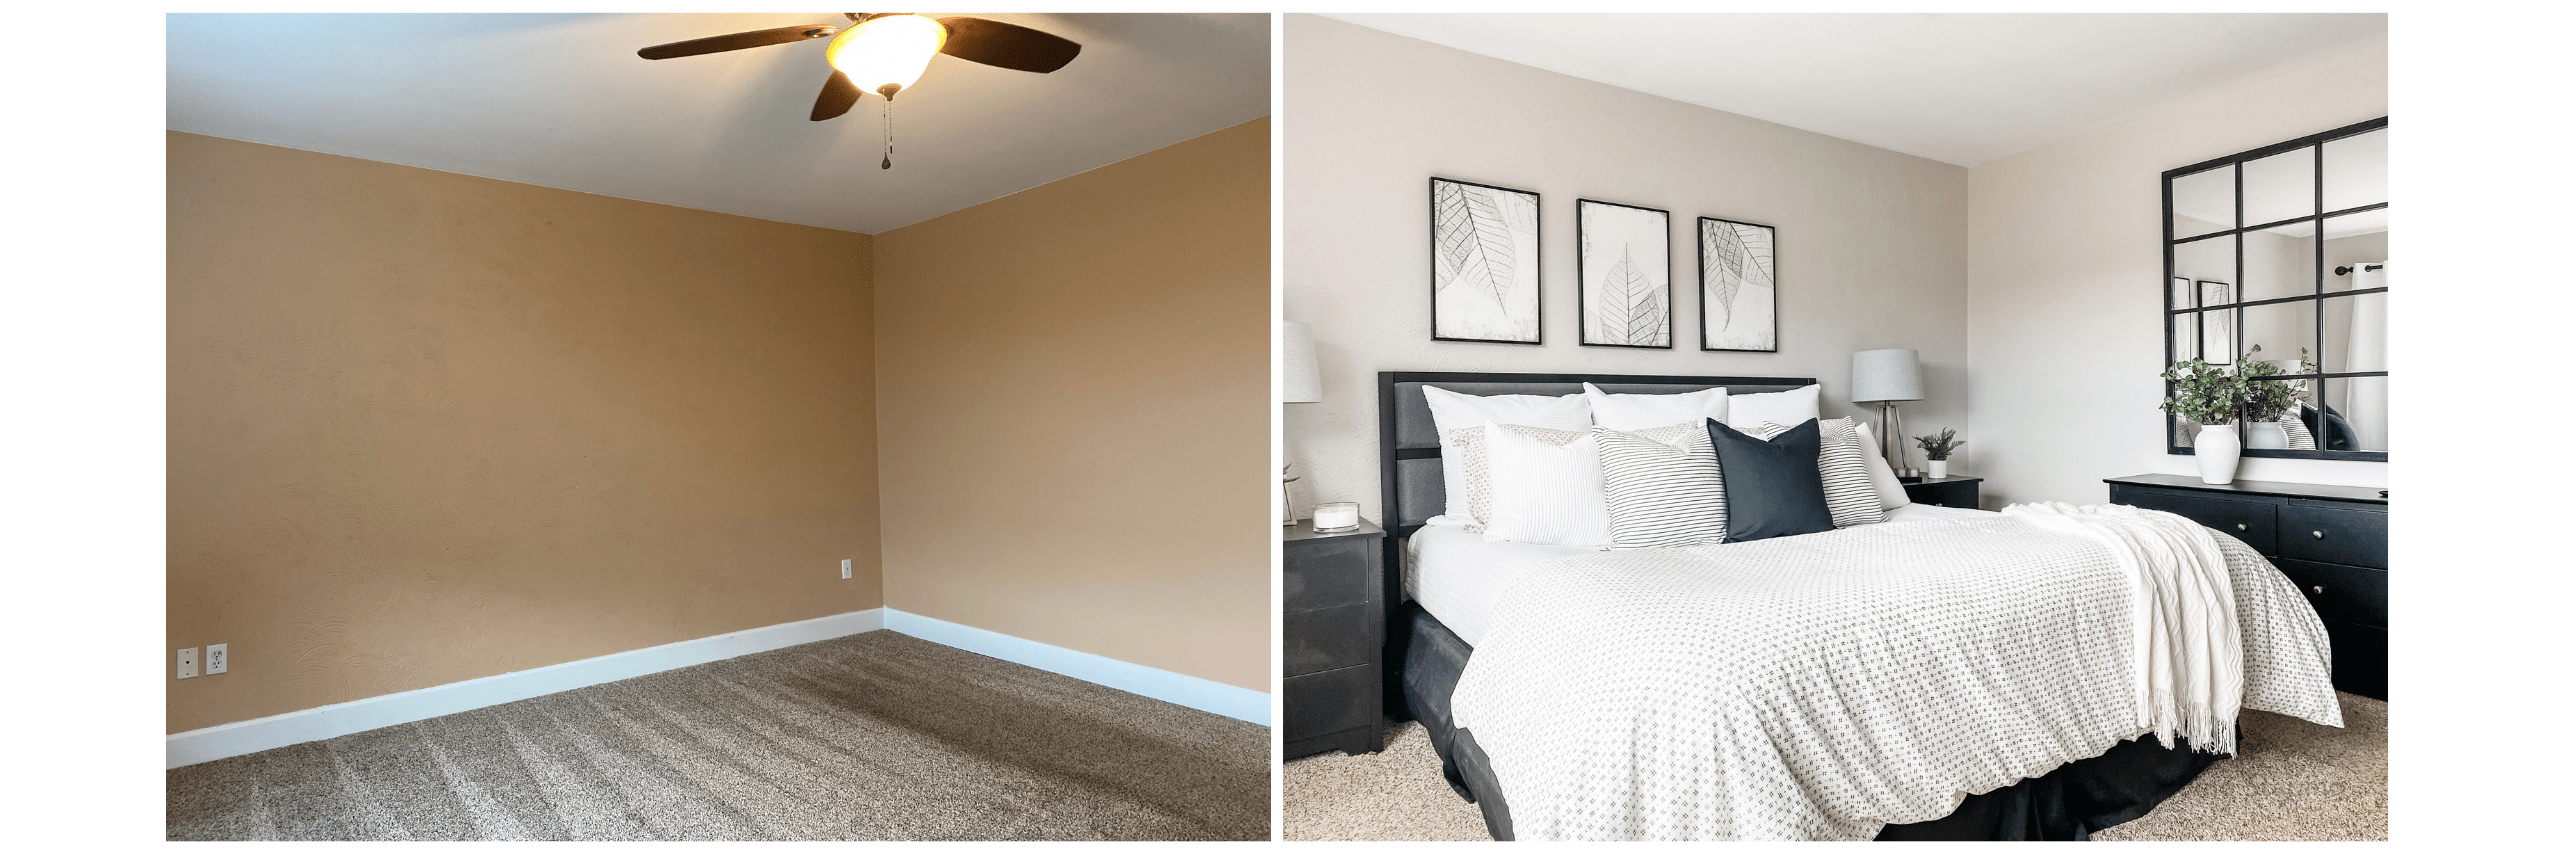 Bedroom Makeover Before and After Photos